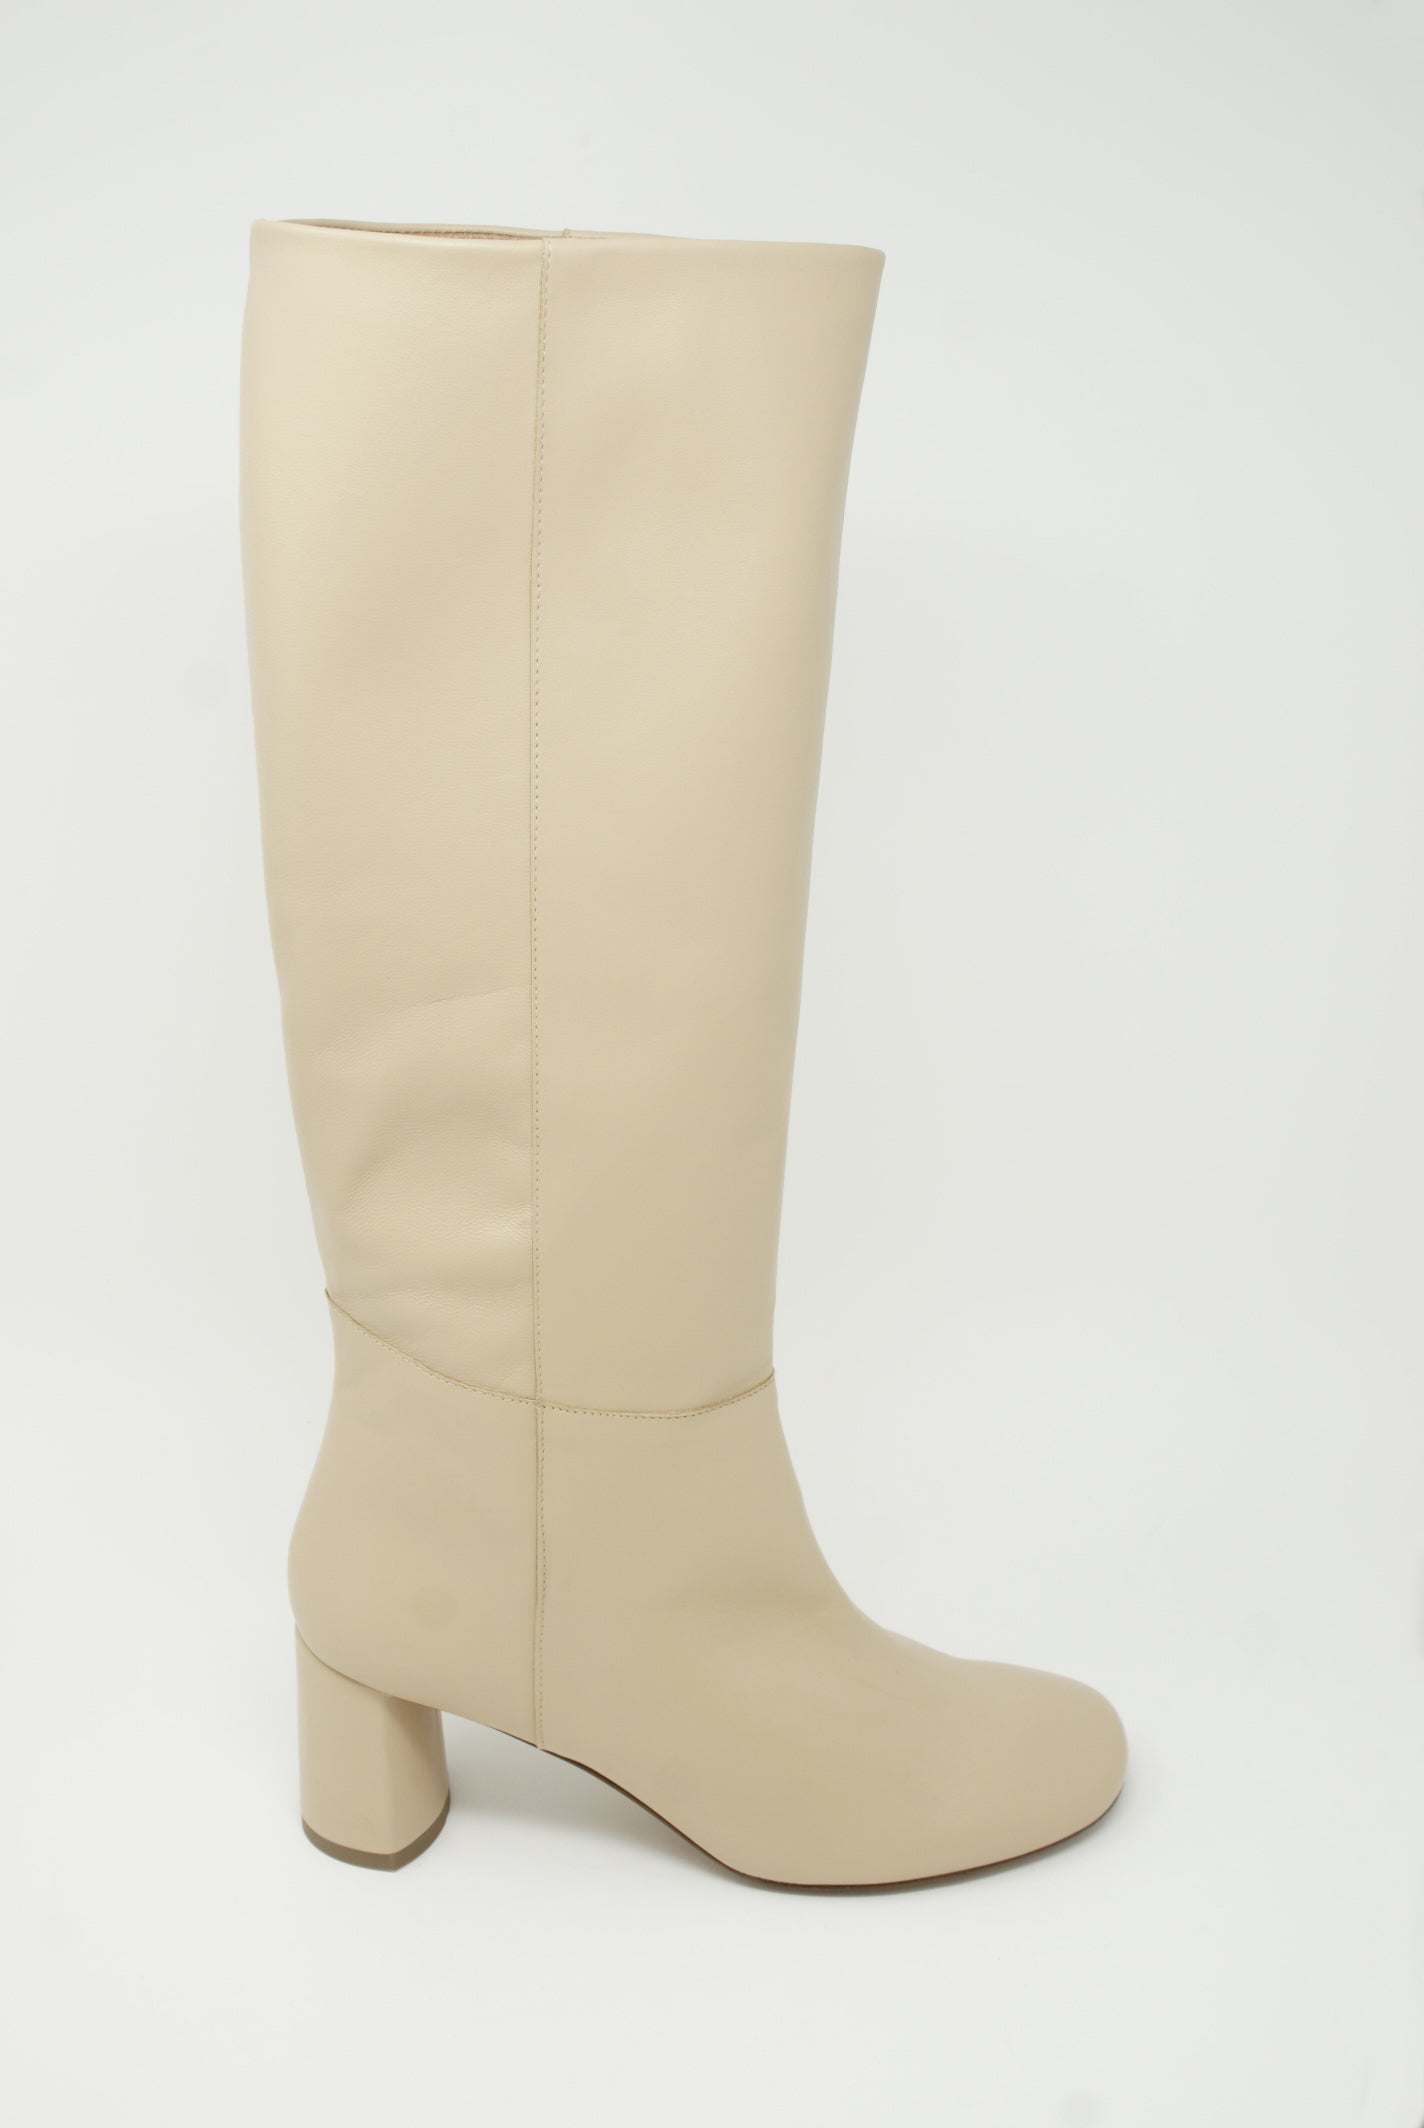 A woman's LOQ Donna Boot in Turrón, a supple leather knee-high pull-on boot, on a white background.